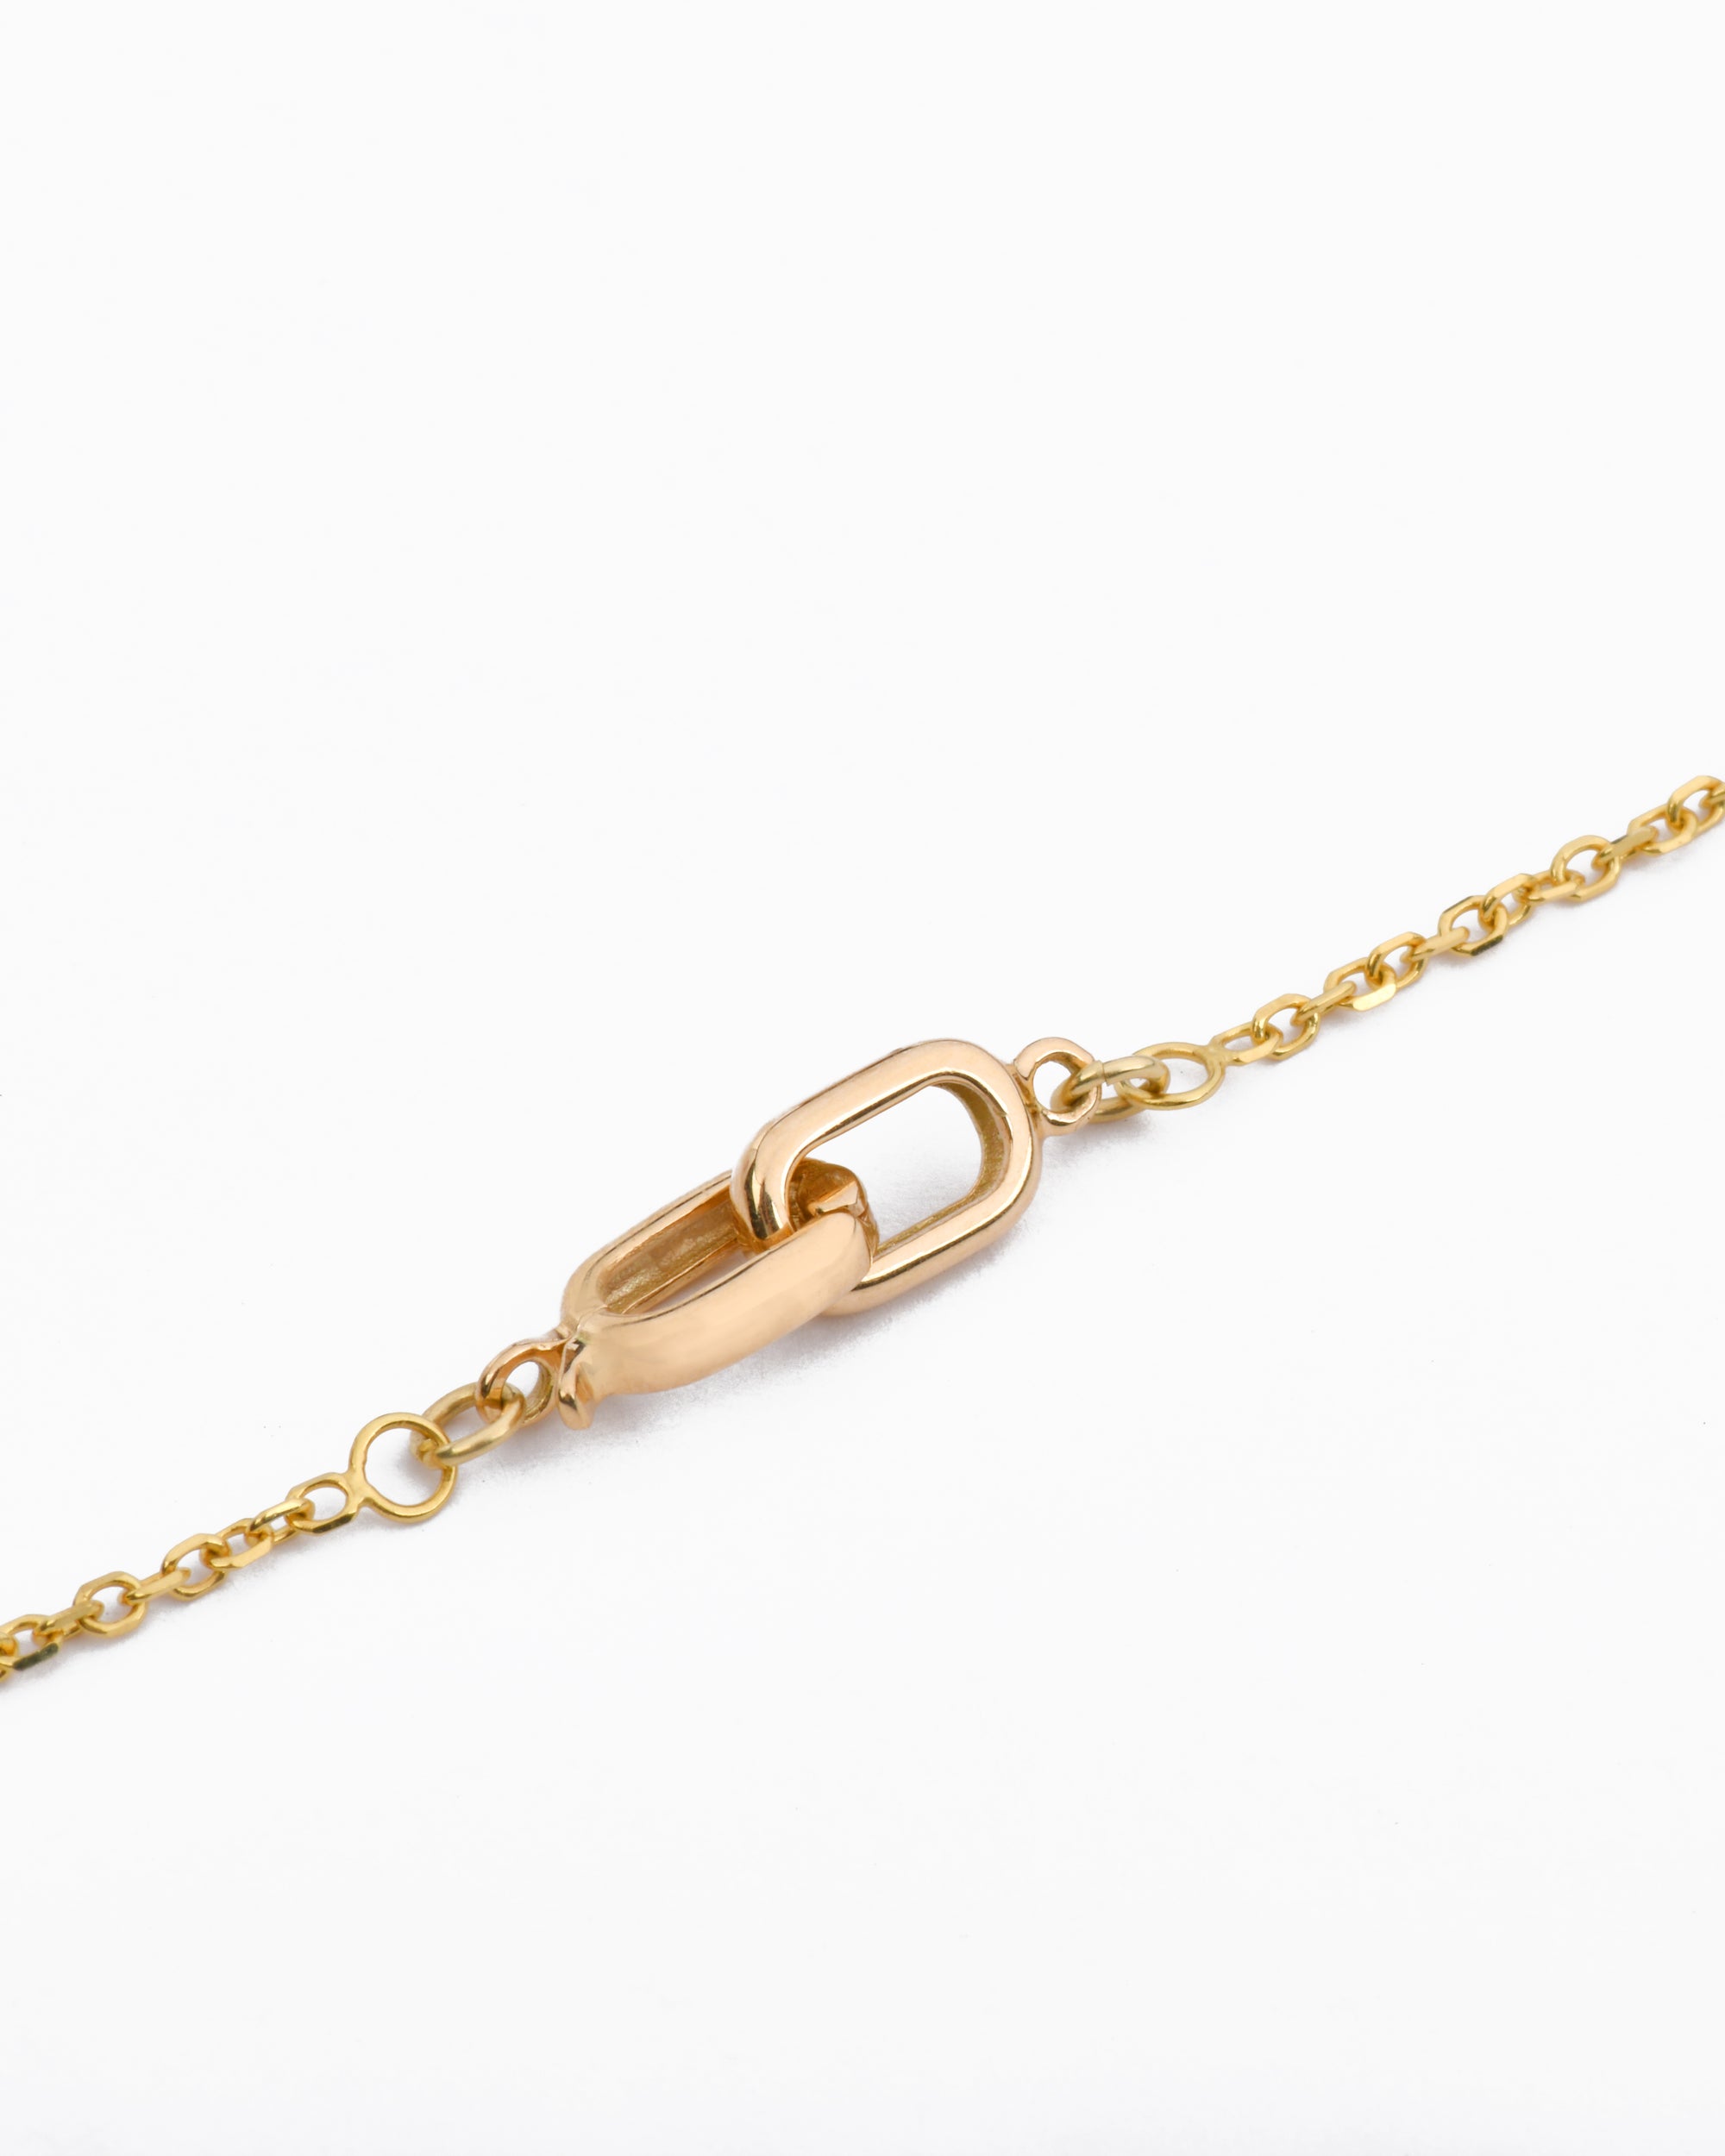 a featured gold clasp with two interlocking oval shapes on a gold necklace